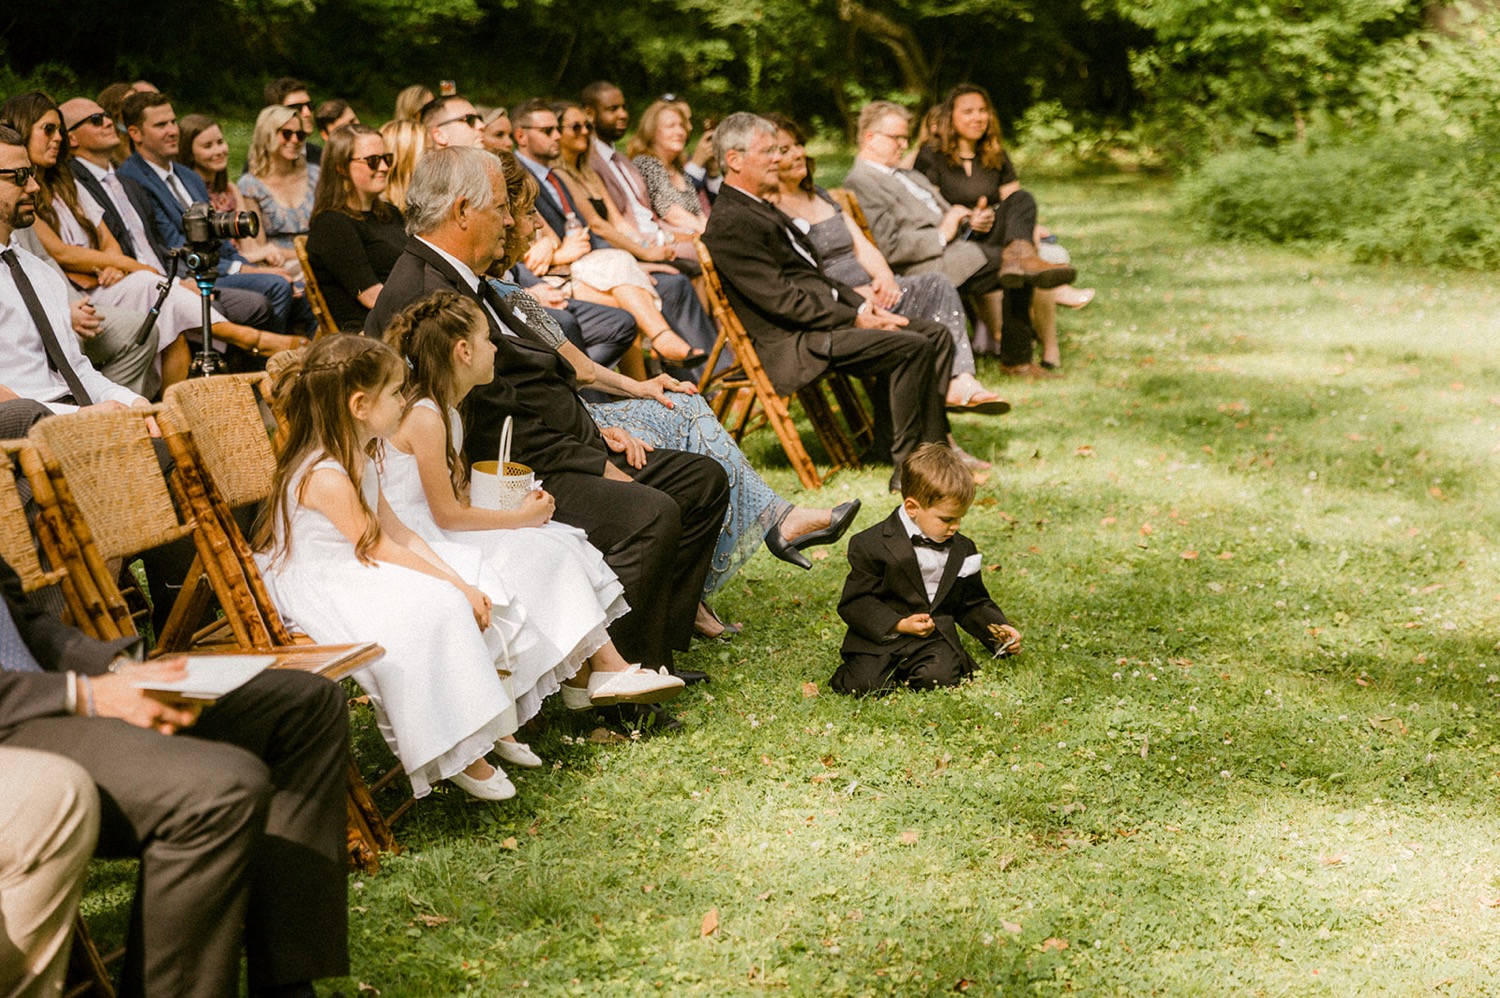 ring bearer and flower girls guests during wedding ceremony